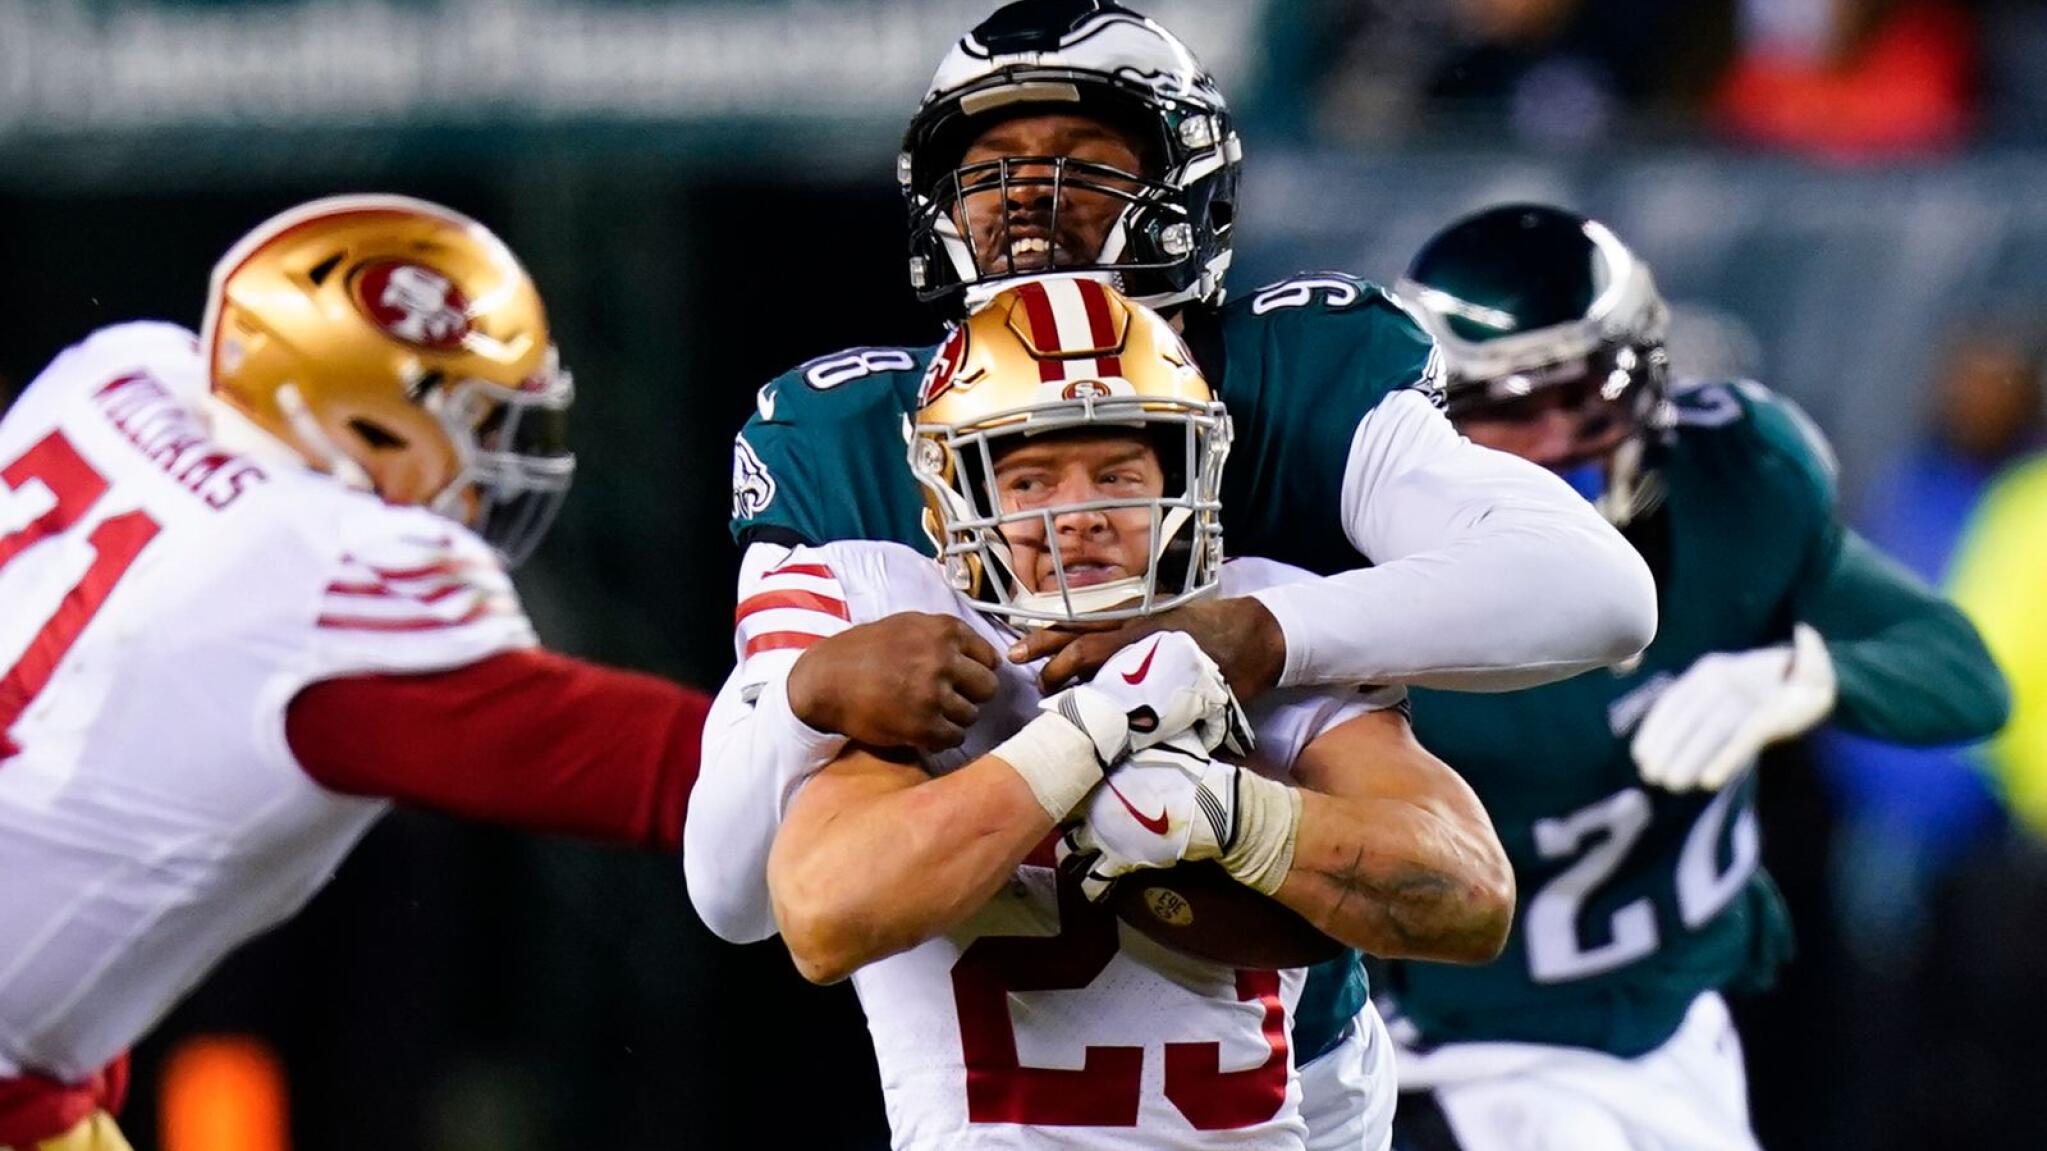 Eagles vs. 49ers in NFC championship: Three keys for Sunday's game